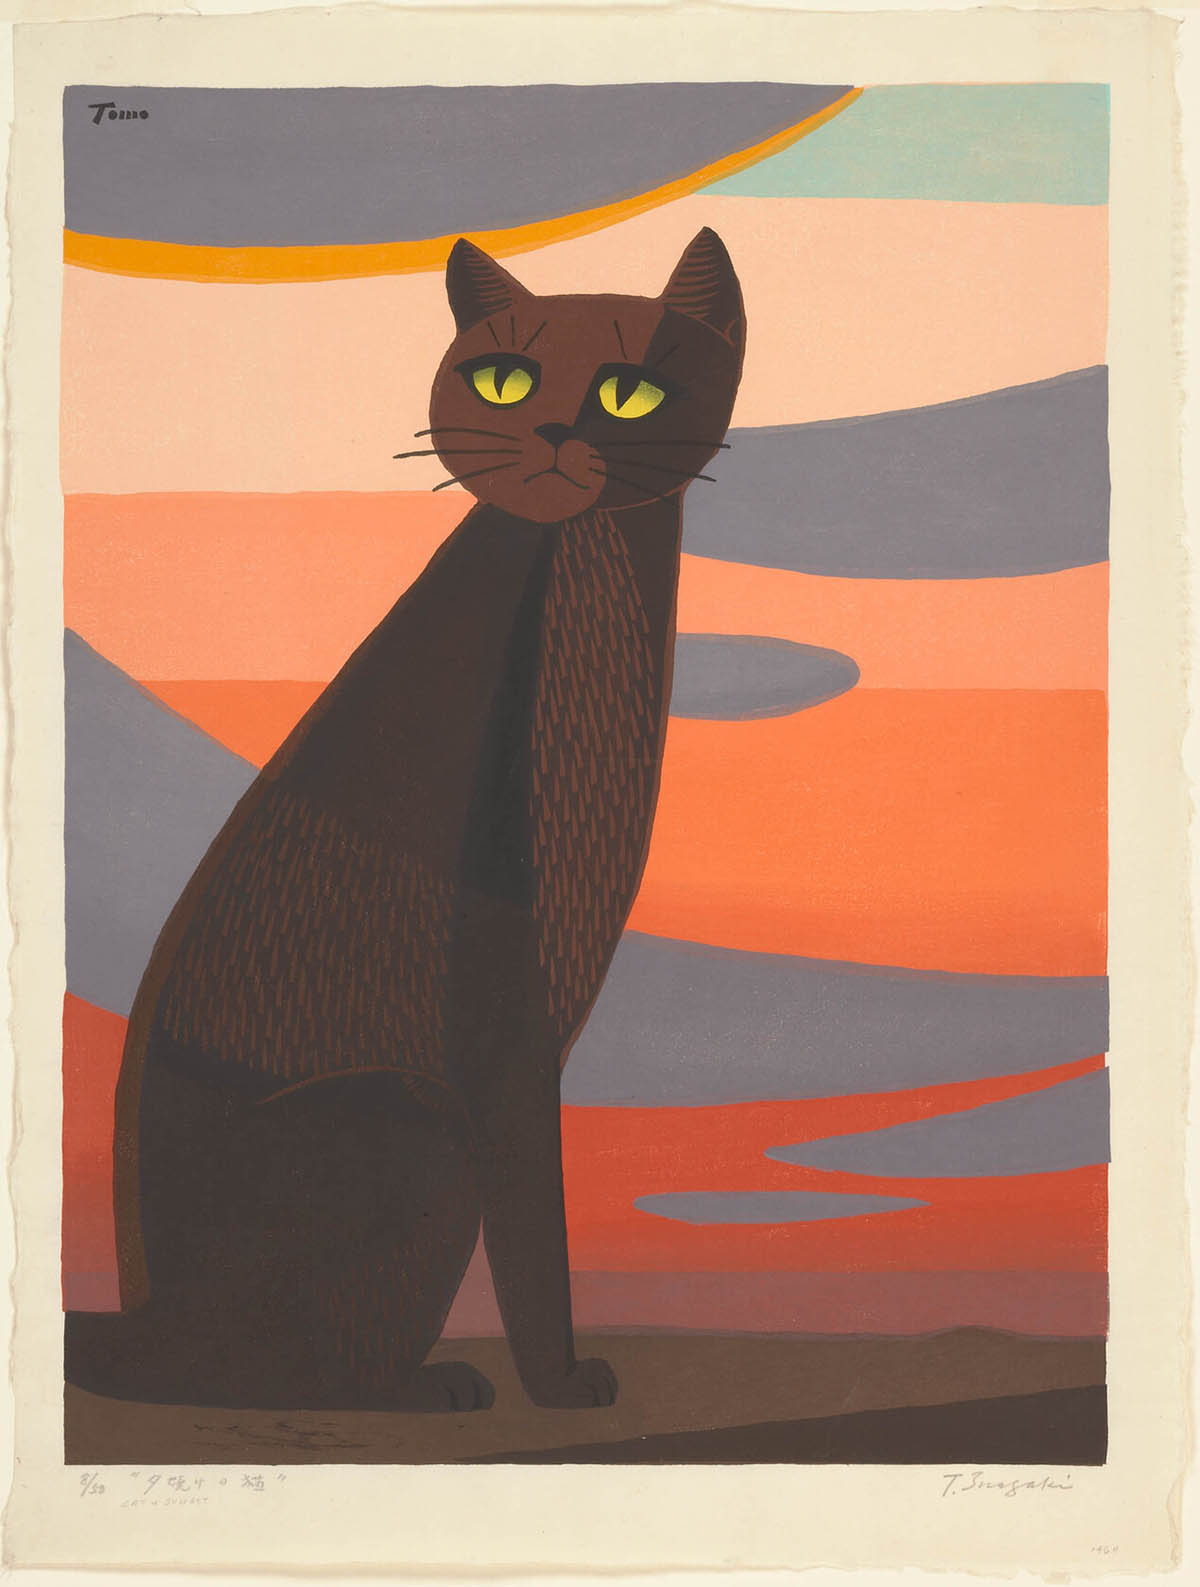 A dark-colored cat sits in the foreground looking over its shoulder with a vibrant sunset in the background. 